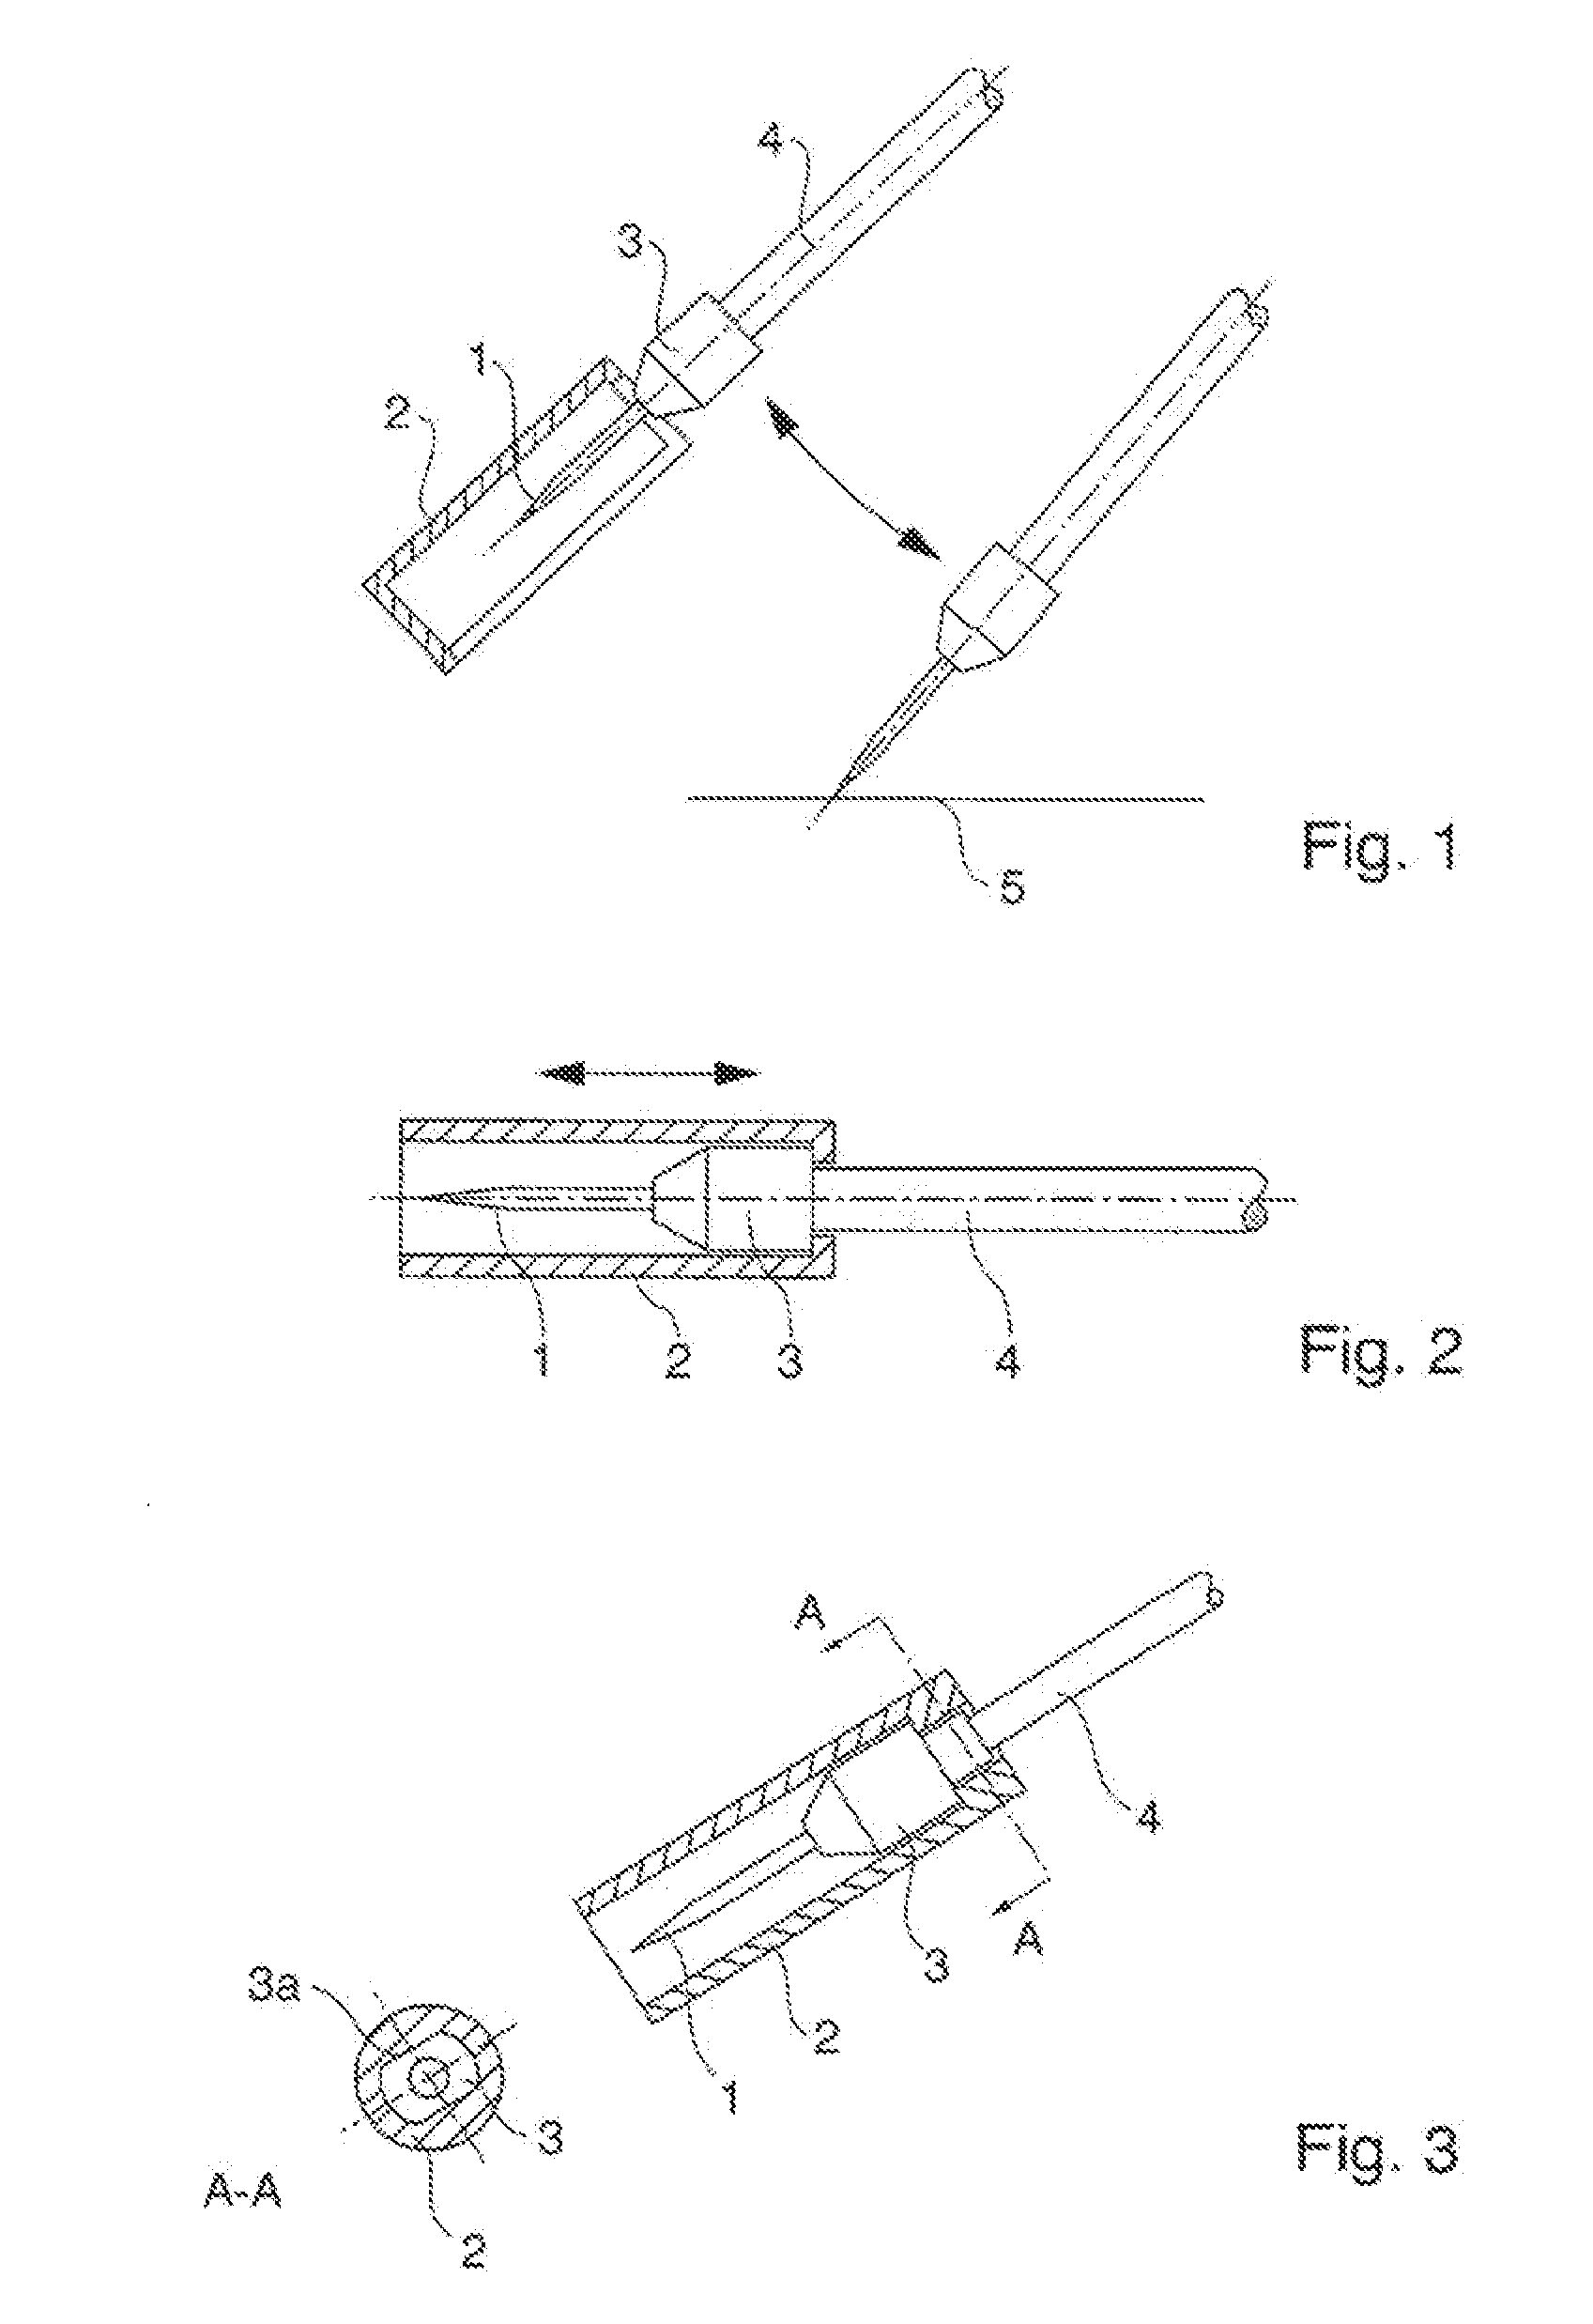 Micromanipulation system comprising a protective system for capillaries